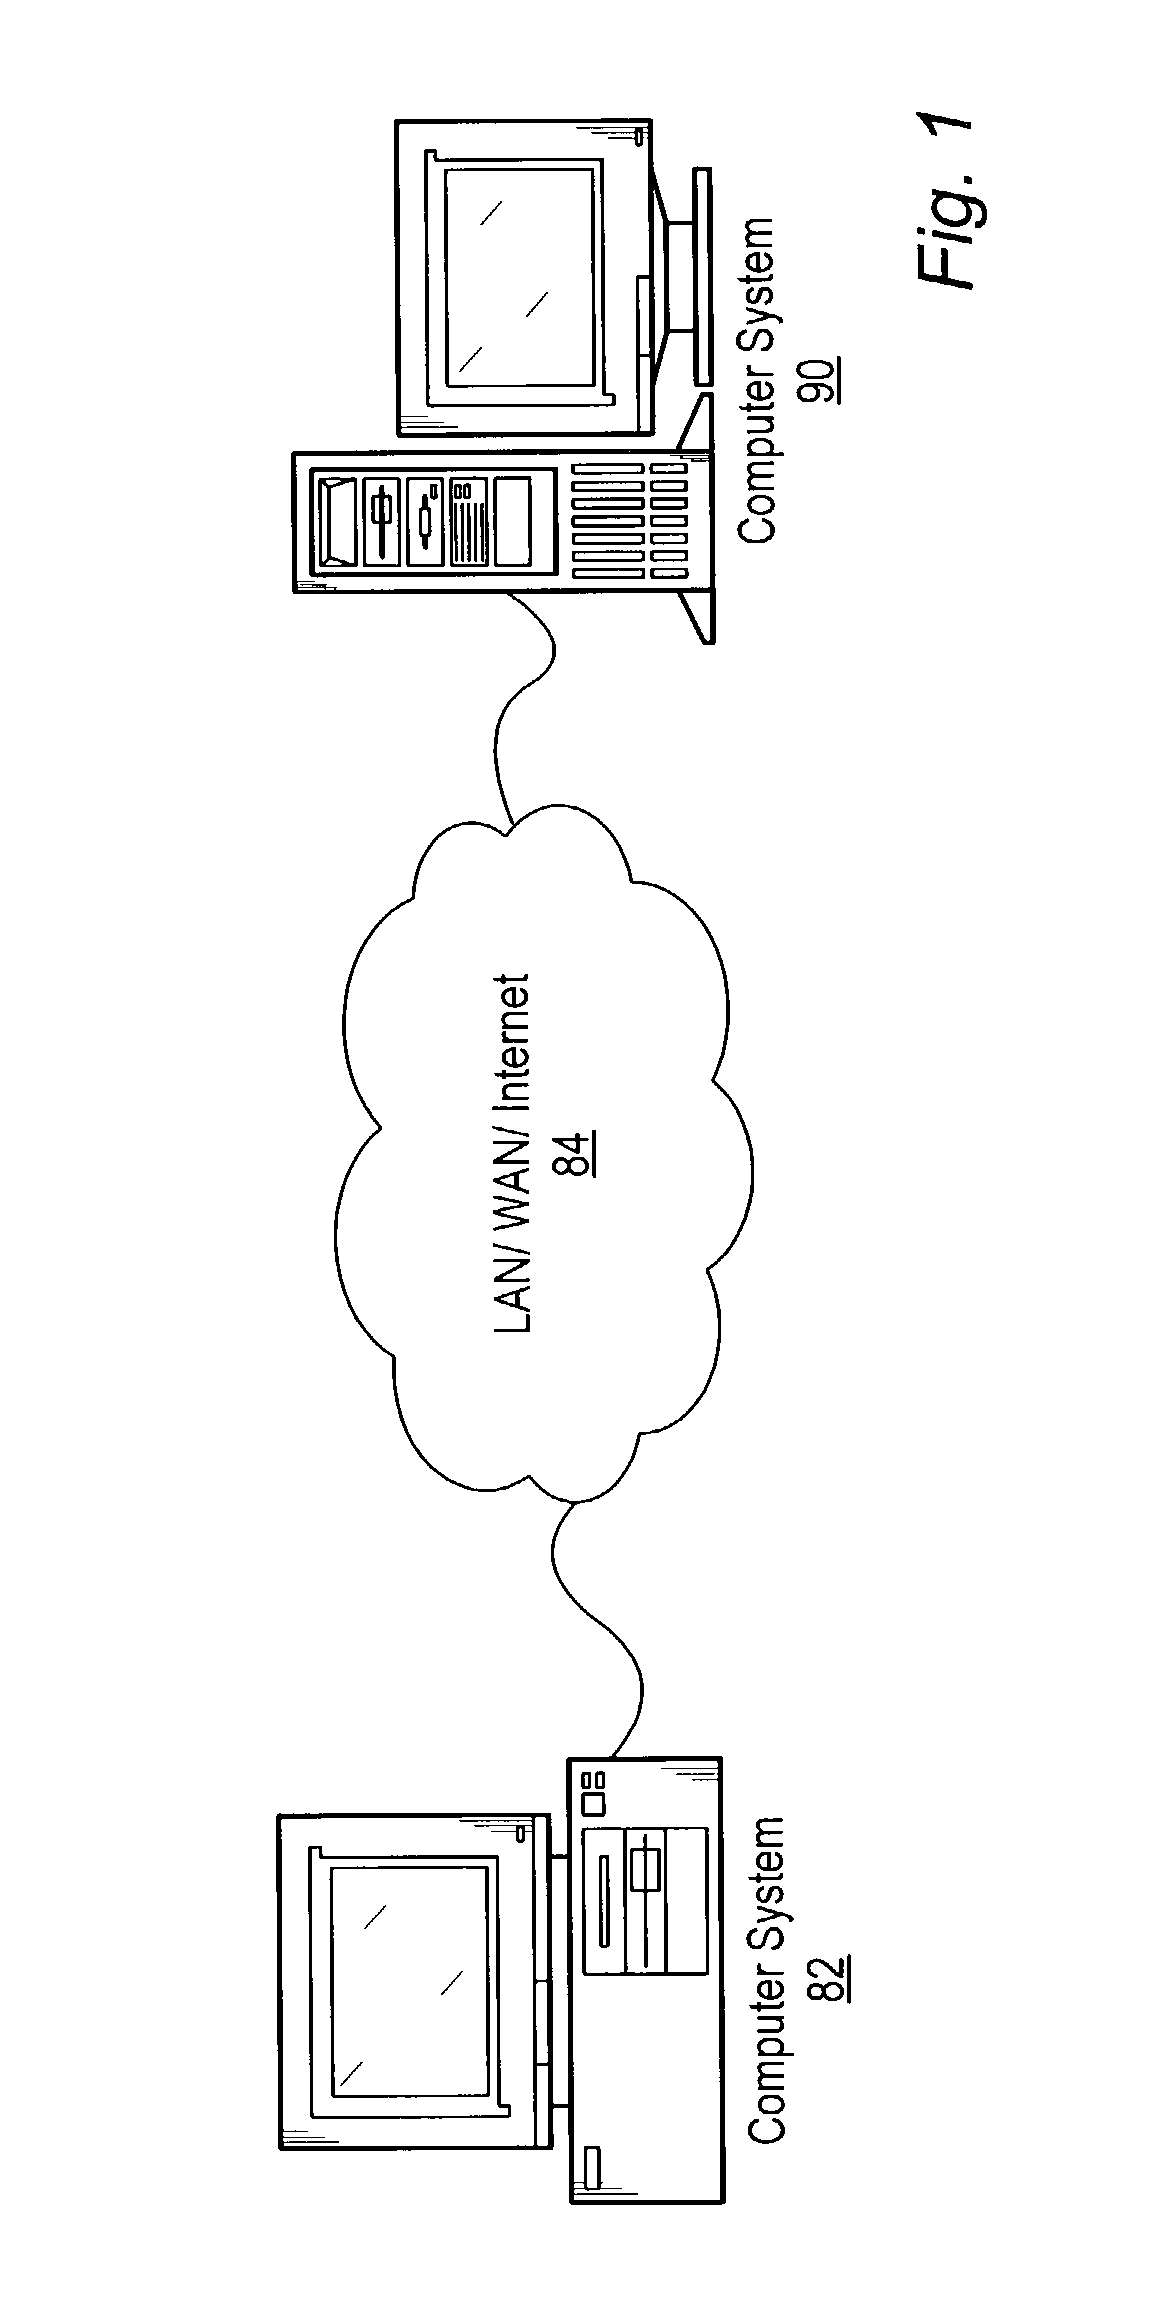 Configuration diagram which graphically displays program relationship